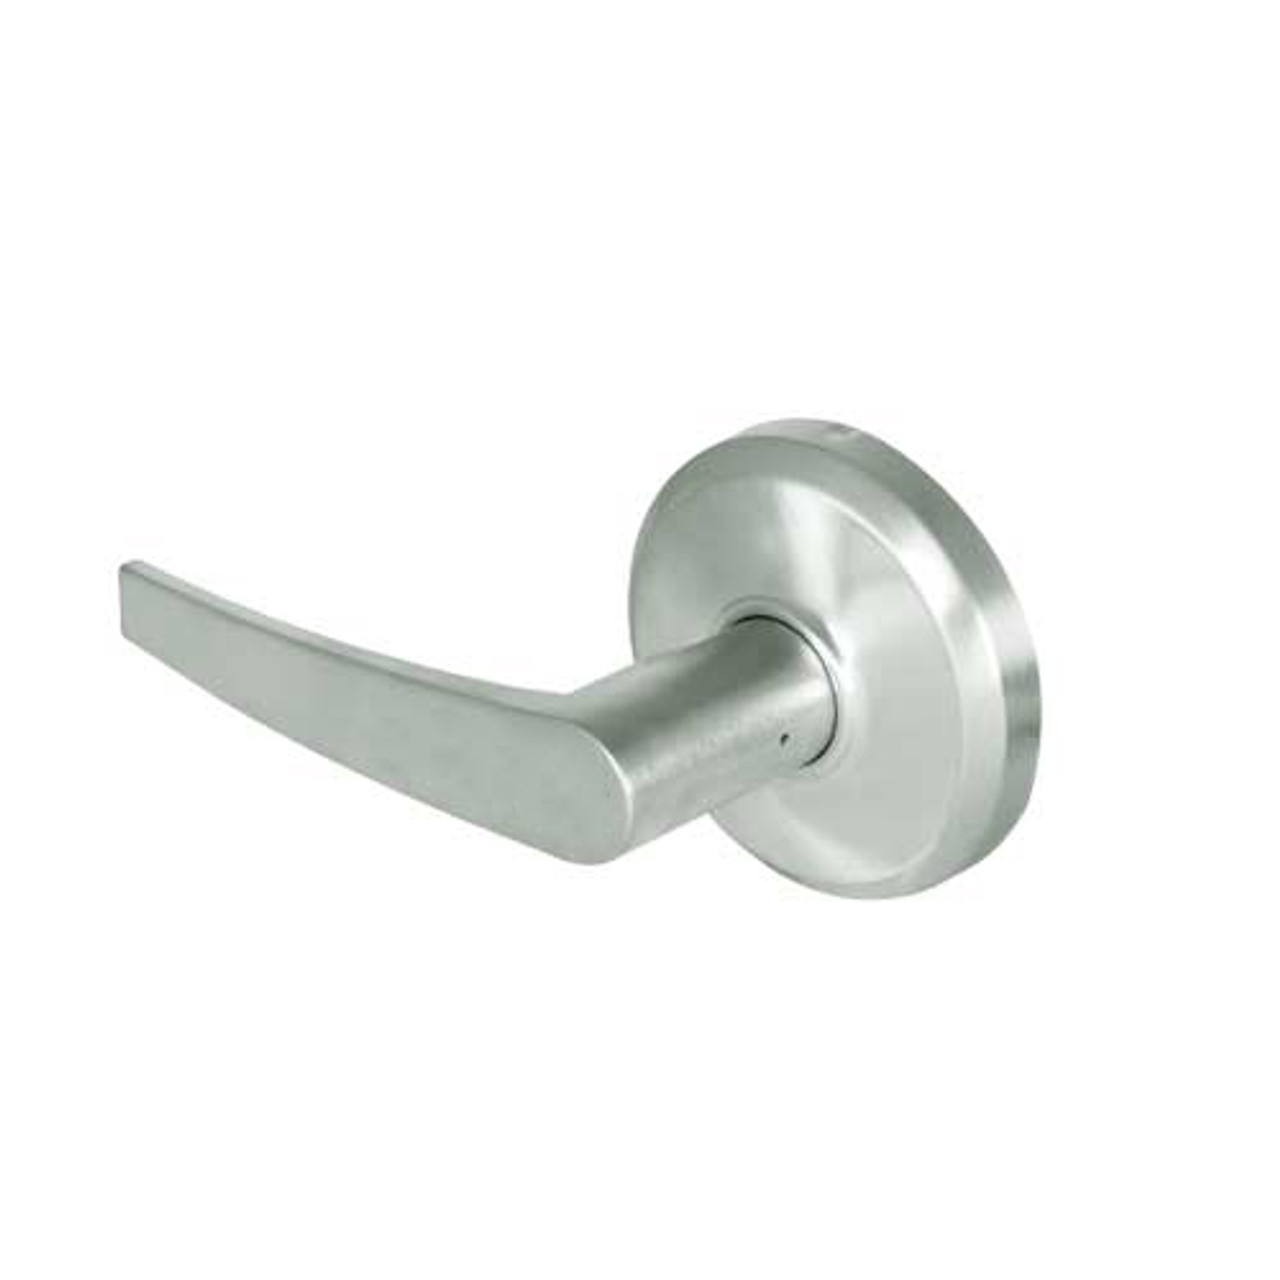 QCL235A619NS8FLS Stanley QCL200 Series Cylindrical Communicating Lock with Slate Lever in Satin Nickel Finish